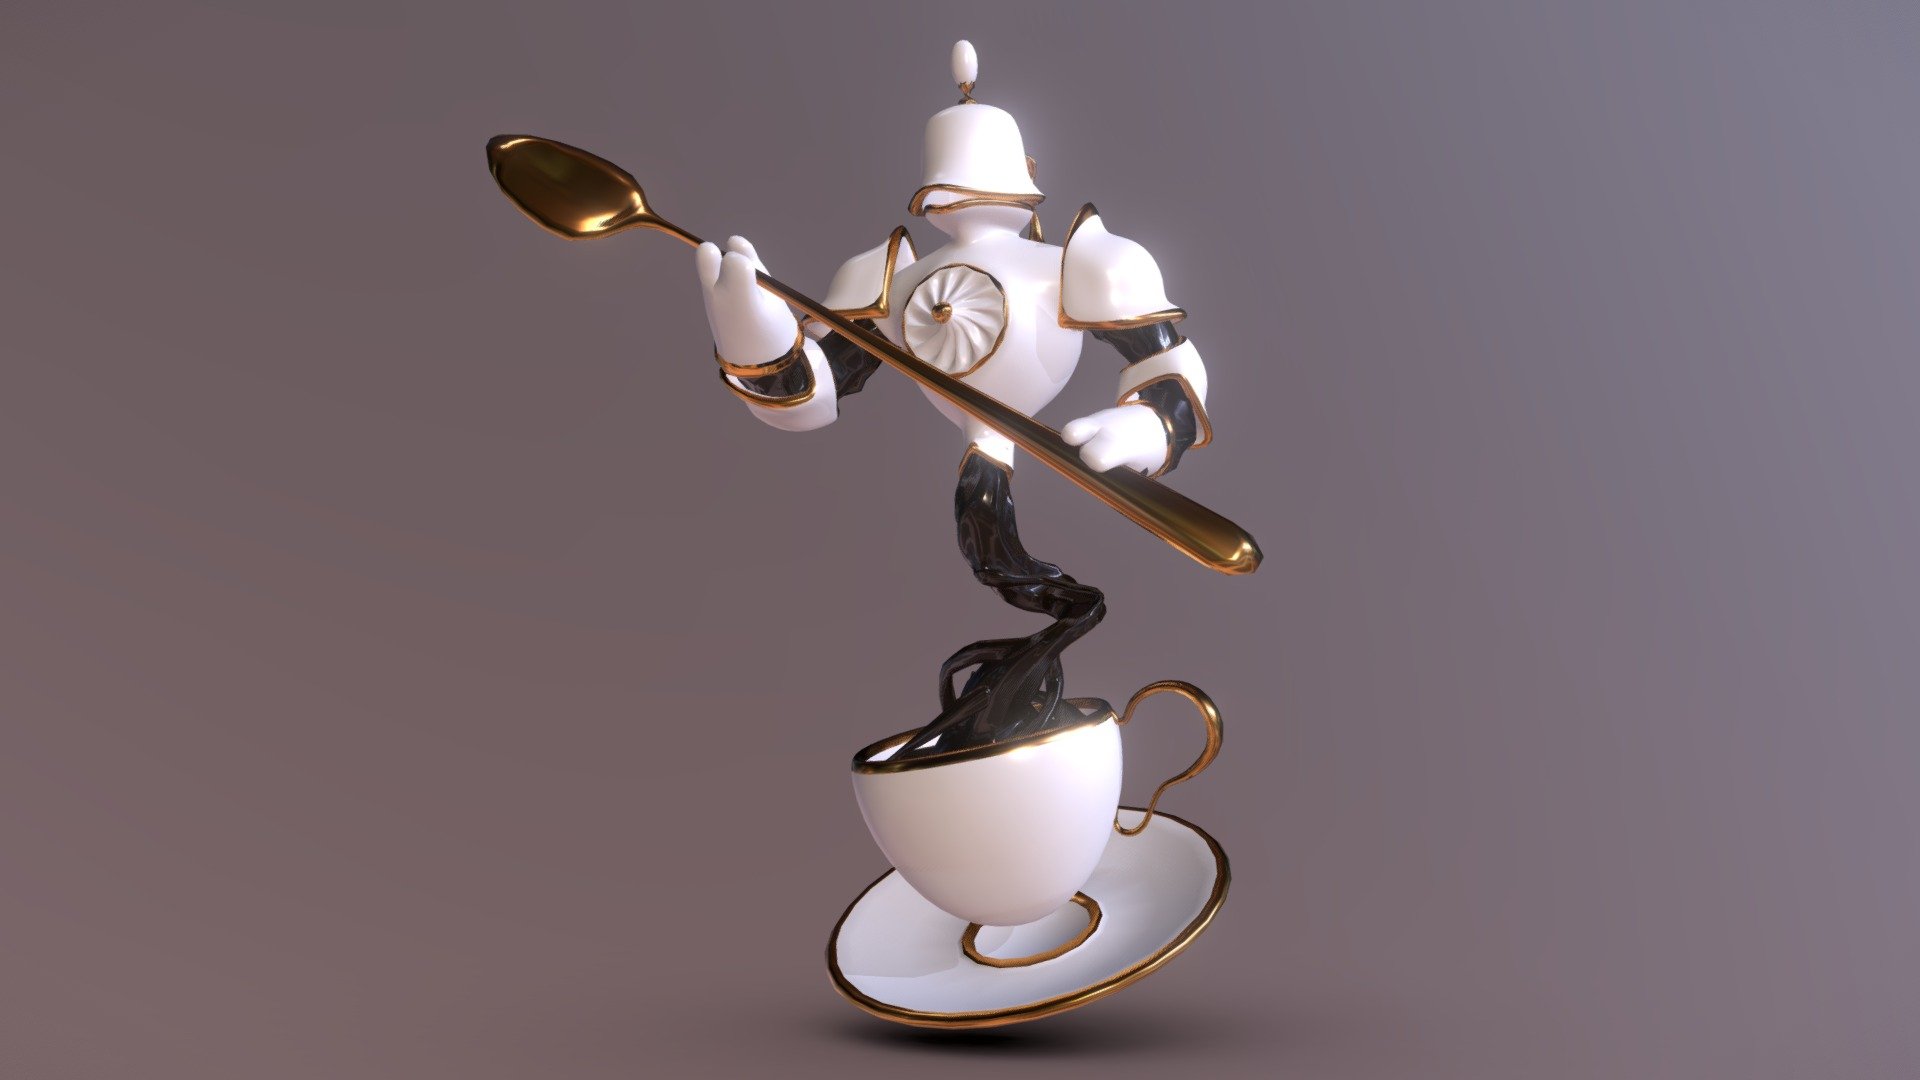 Concept of a knight mixed with a teacup - TeaCup Knight - 3D model by clement_martinet 3d model